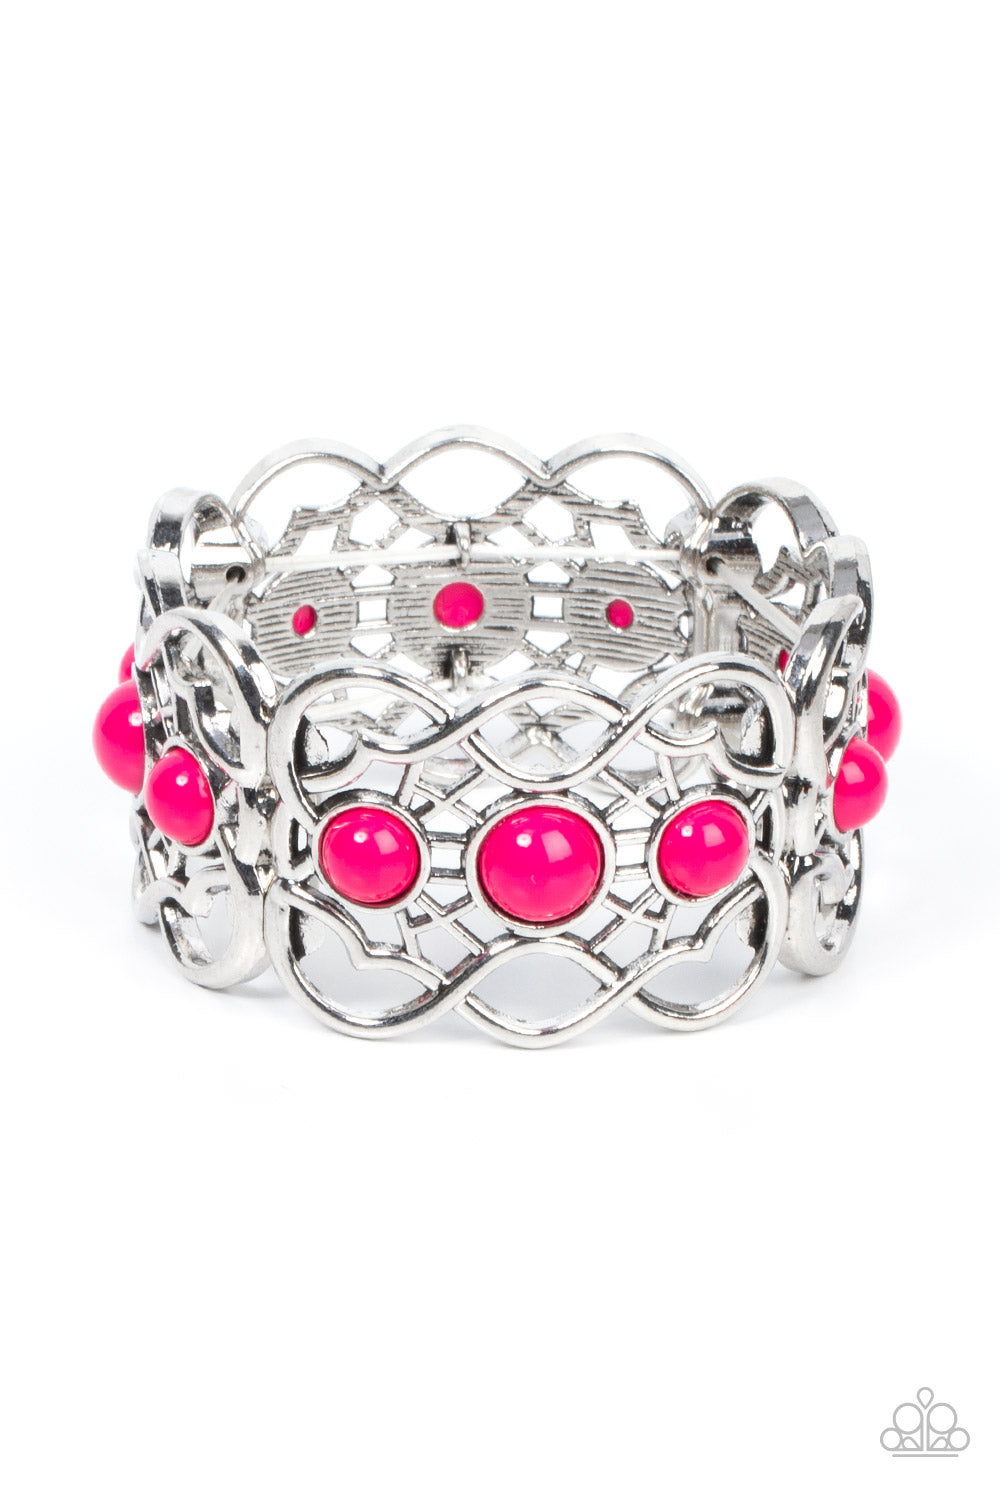 Very Versailles - Fuchsia Pink and Silver Bracelet - Paparazzi Accessories - A trio of bubbly Fuchsia Fedora beads adorn the centers of vine-like silver frames that are threaded along a stretchy band around the wrist, creating a whimsical centerpiece. Sold as one individual bracelet.